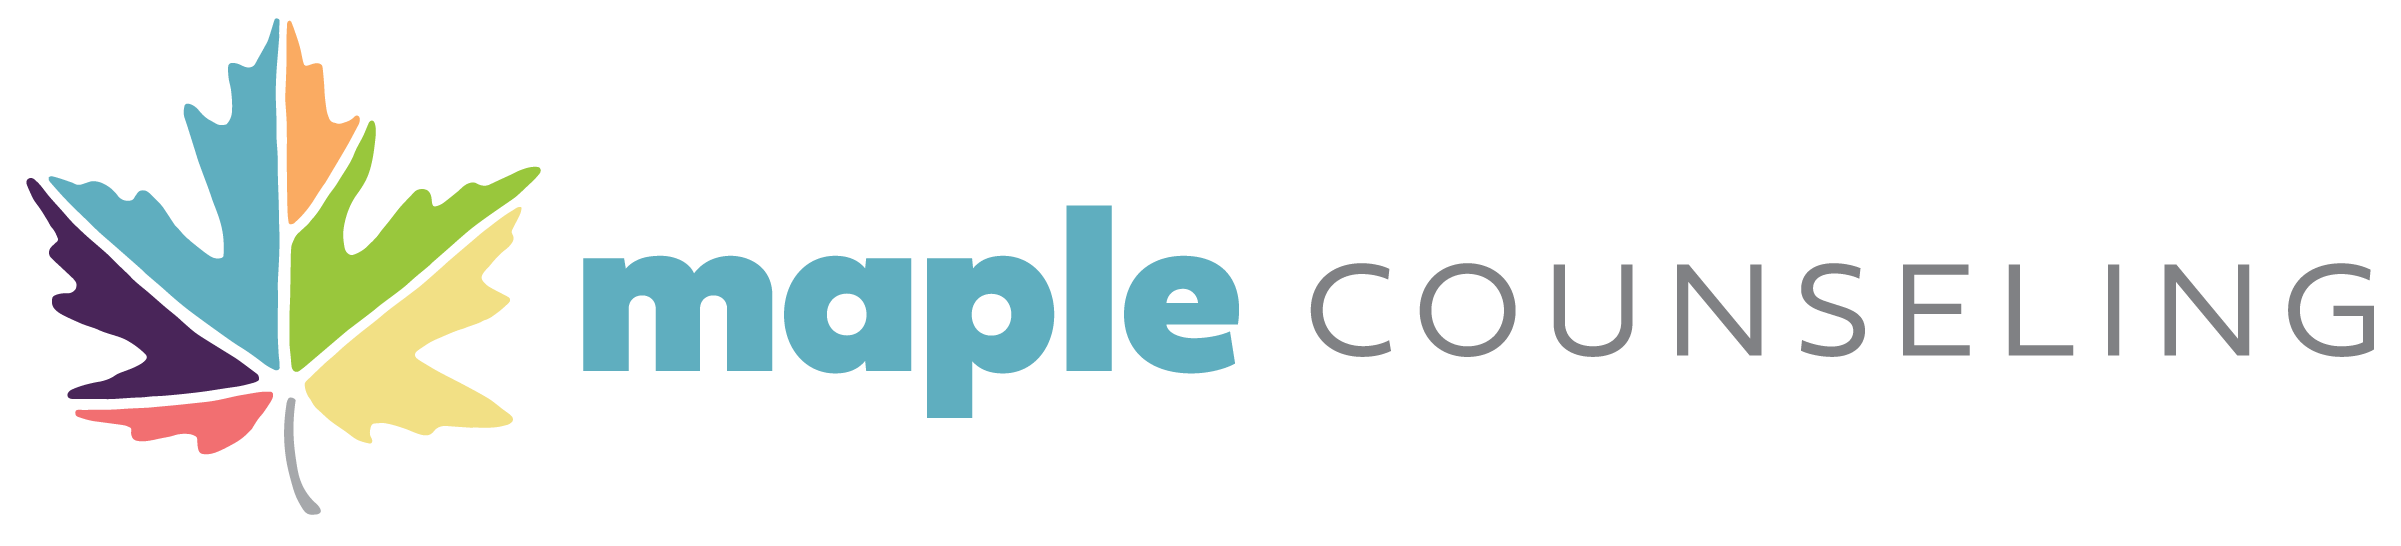 Maple Counseling Logo